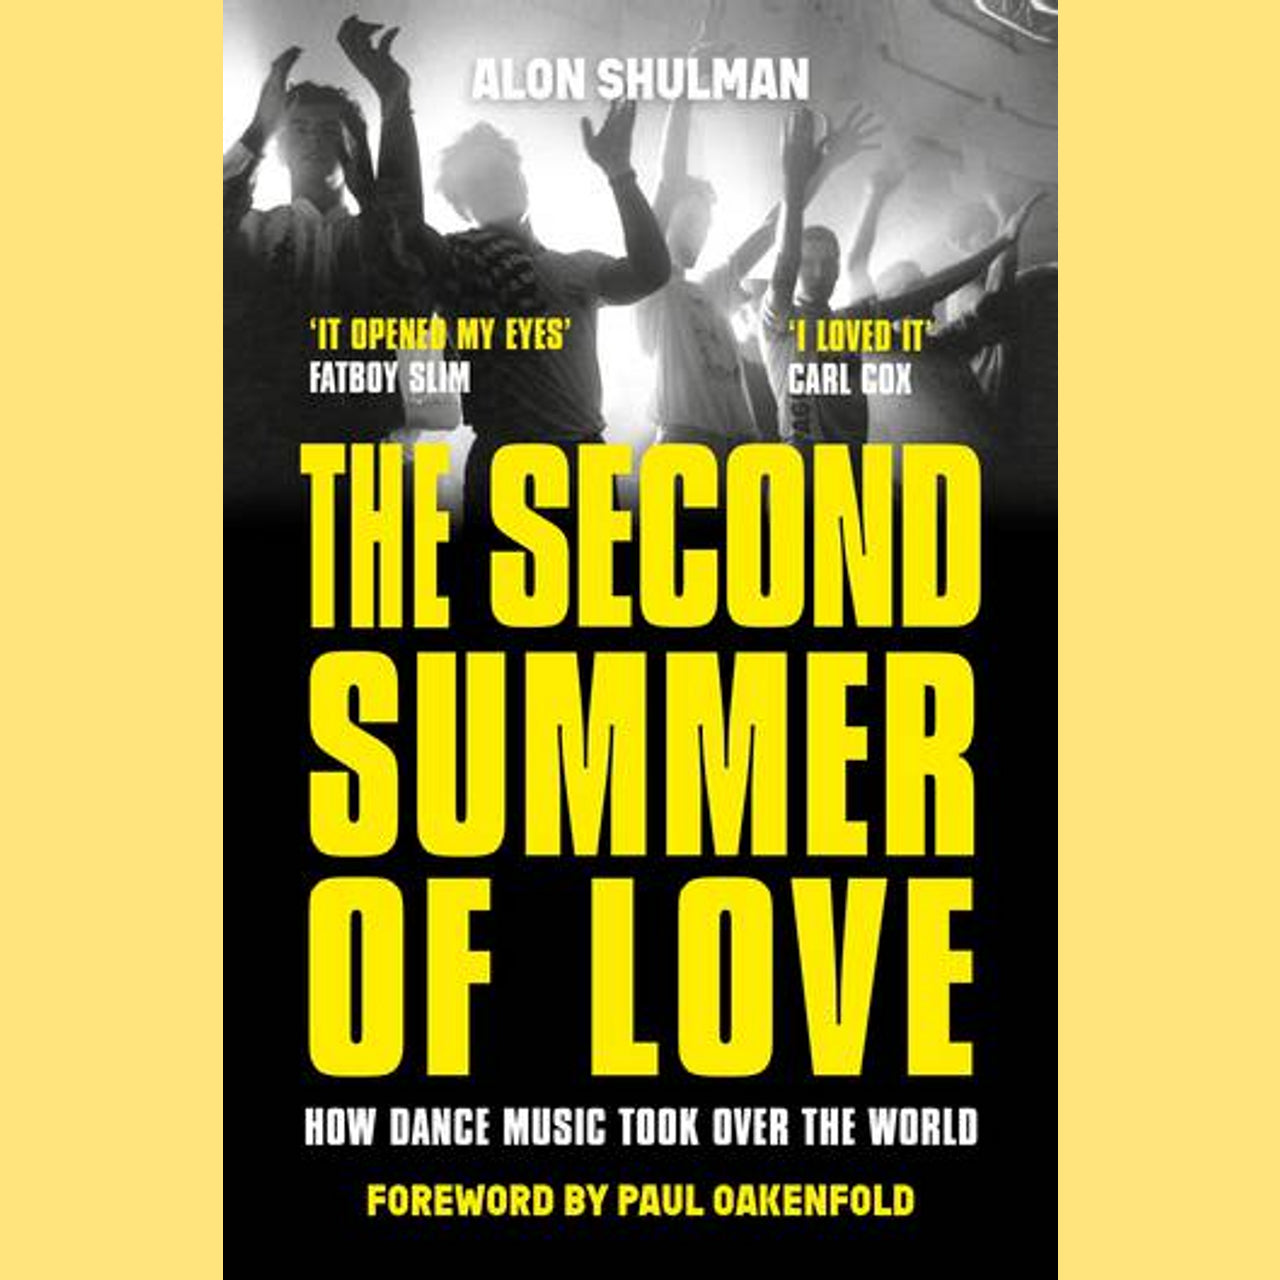 Alon Shulman - The Second Summer of Love | Buy the book from Flying Nun Records